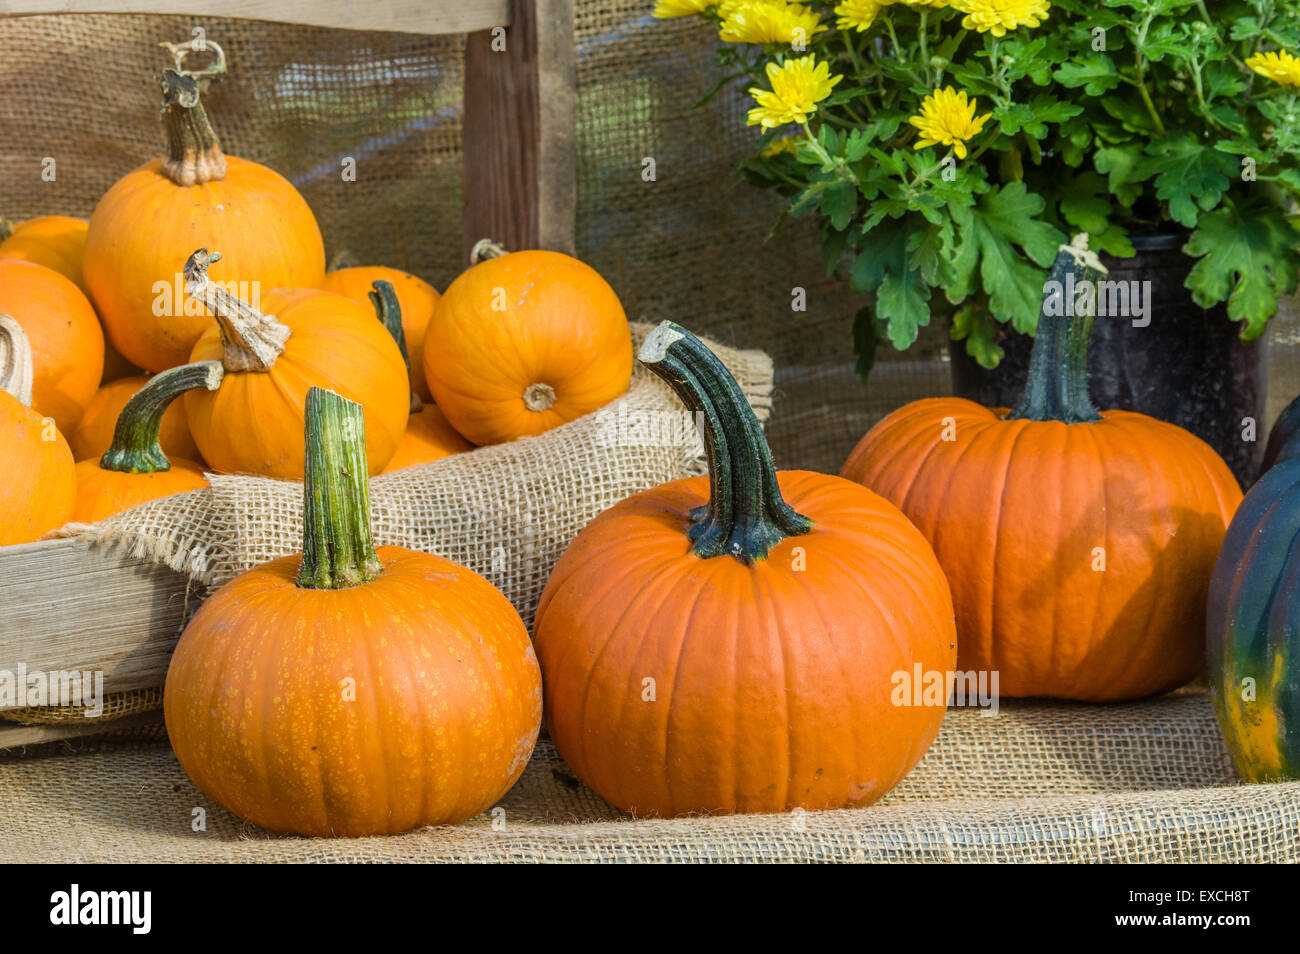 Fall festival pumpkin display with flowers Stock Photo